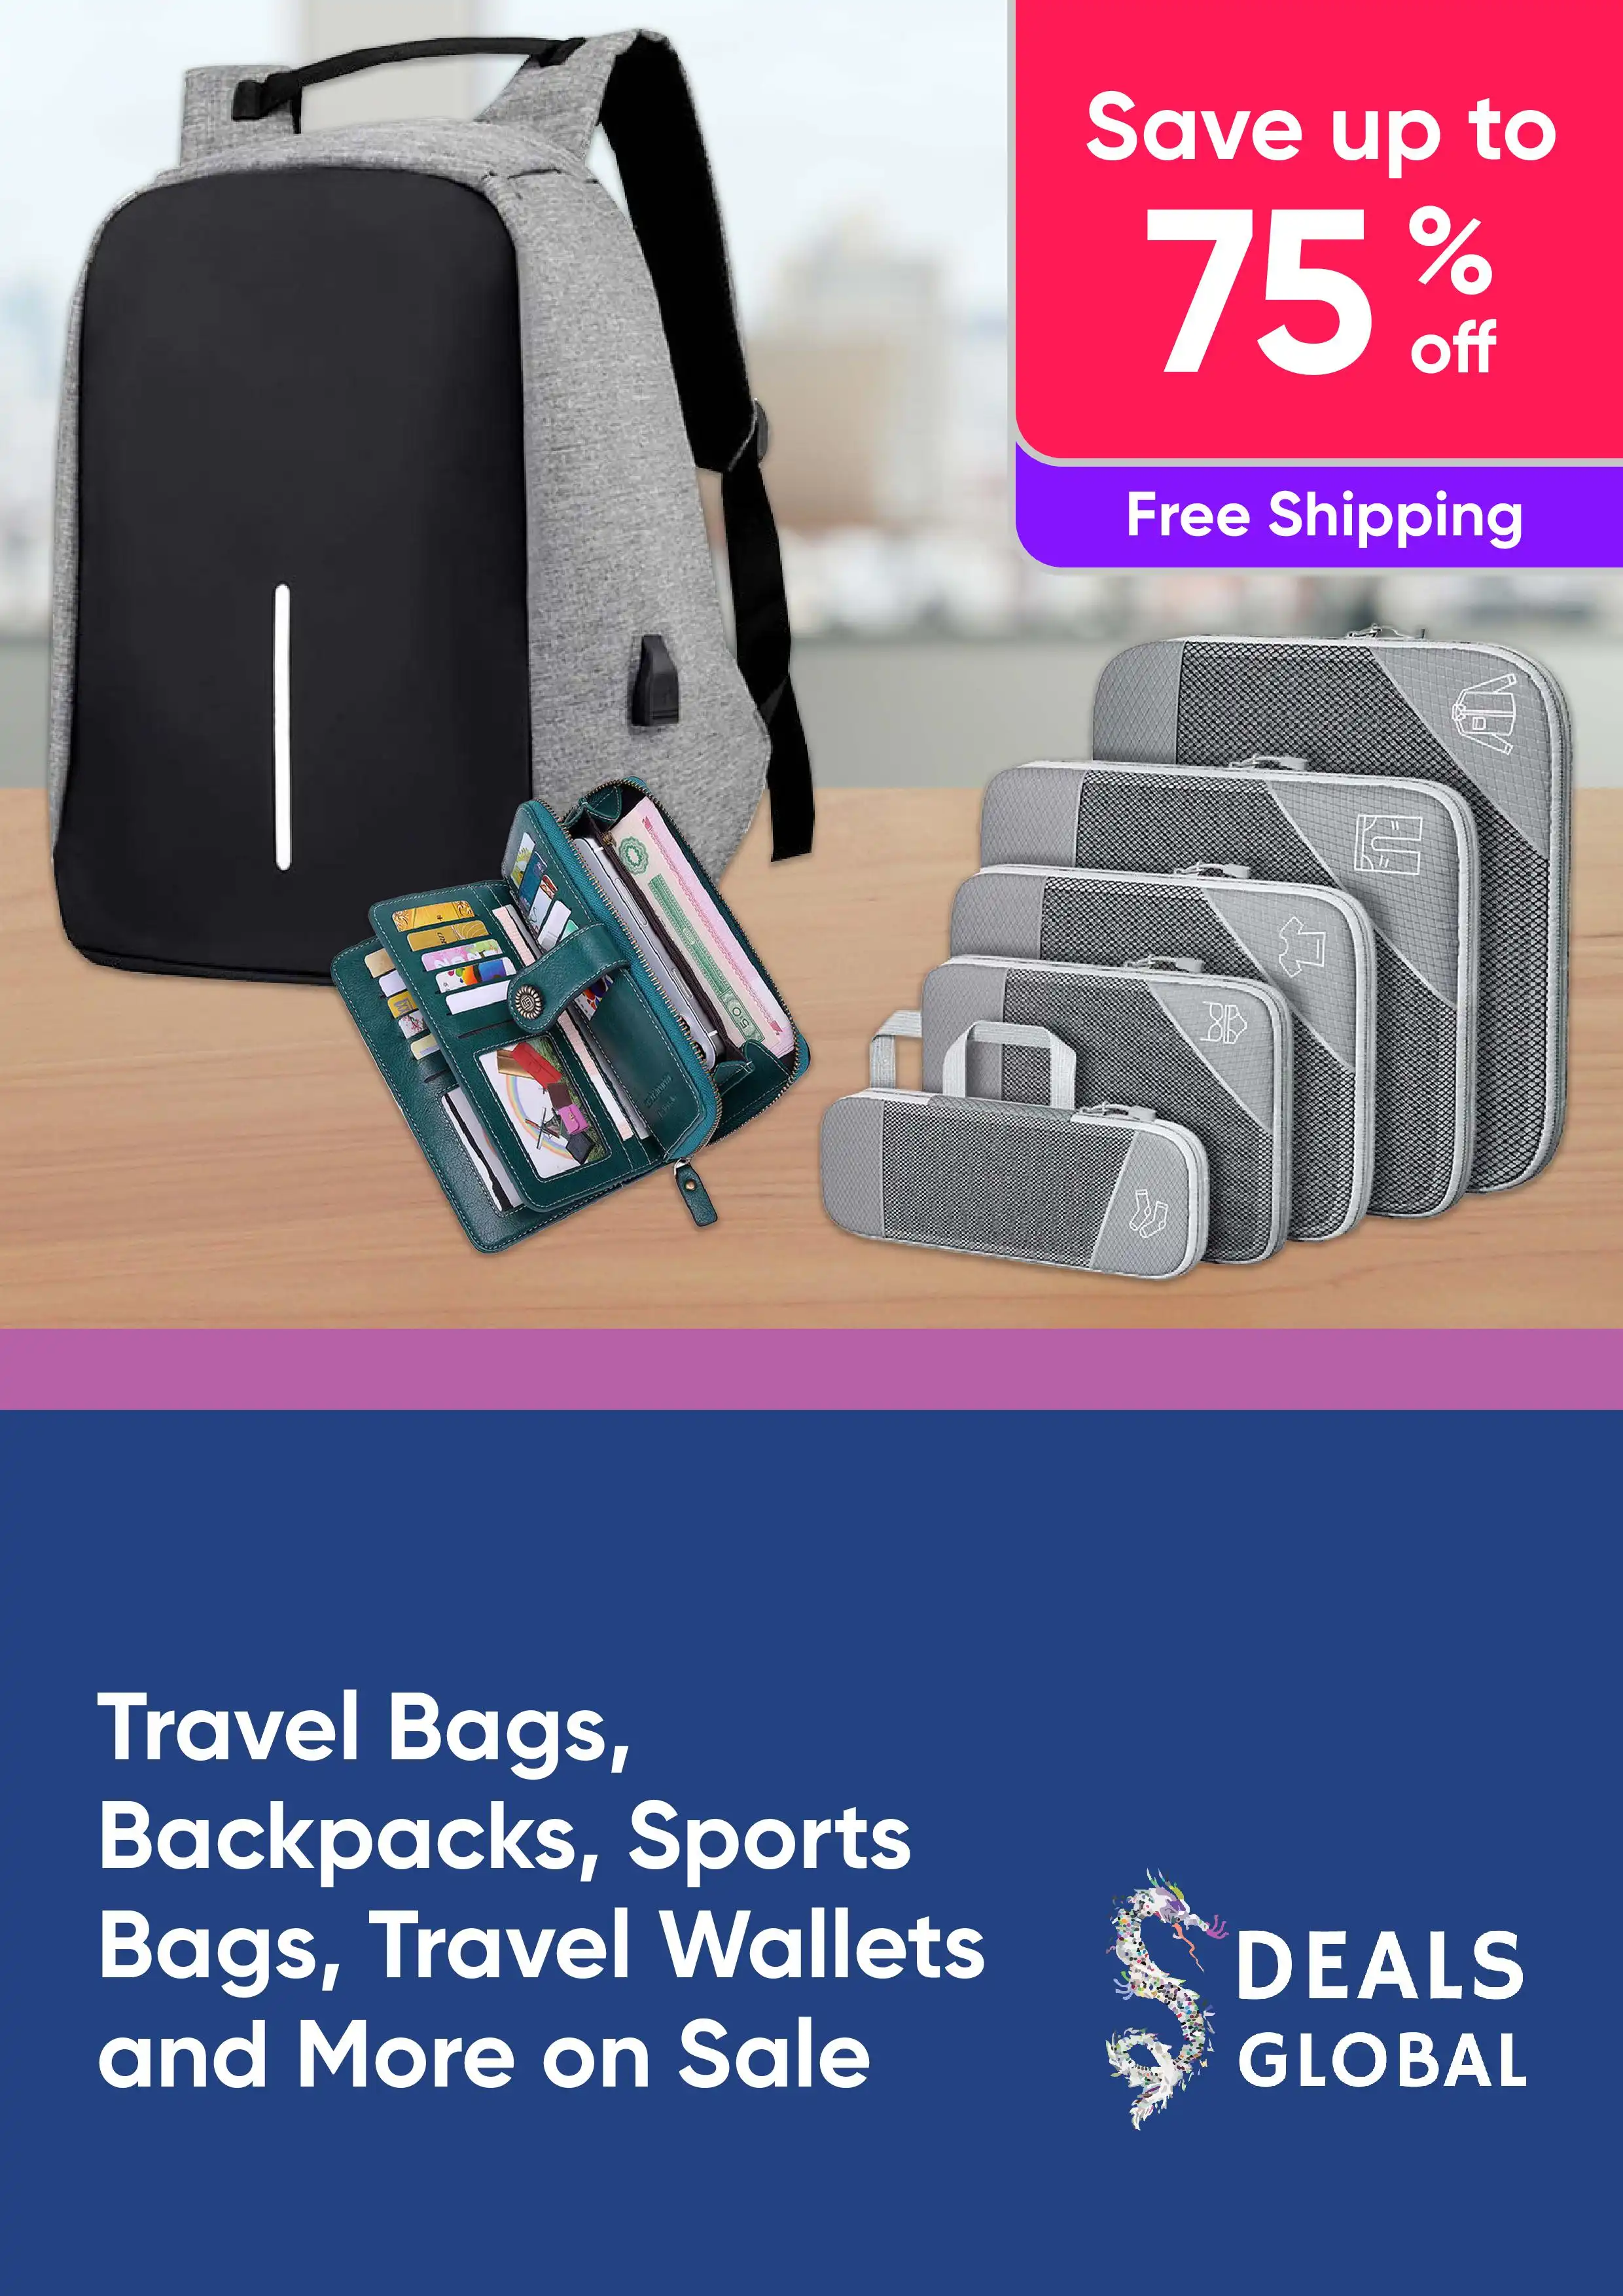 Travel Bags, Backpacks, Sports Bags, Tracel Wallets and More on Sale Now - Save Up to 75%